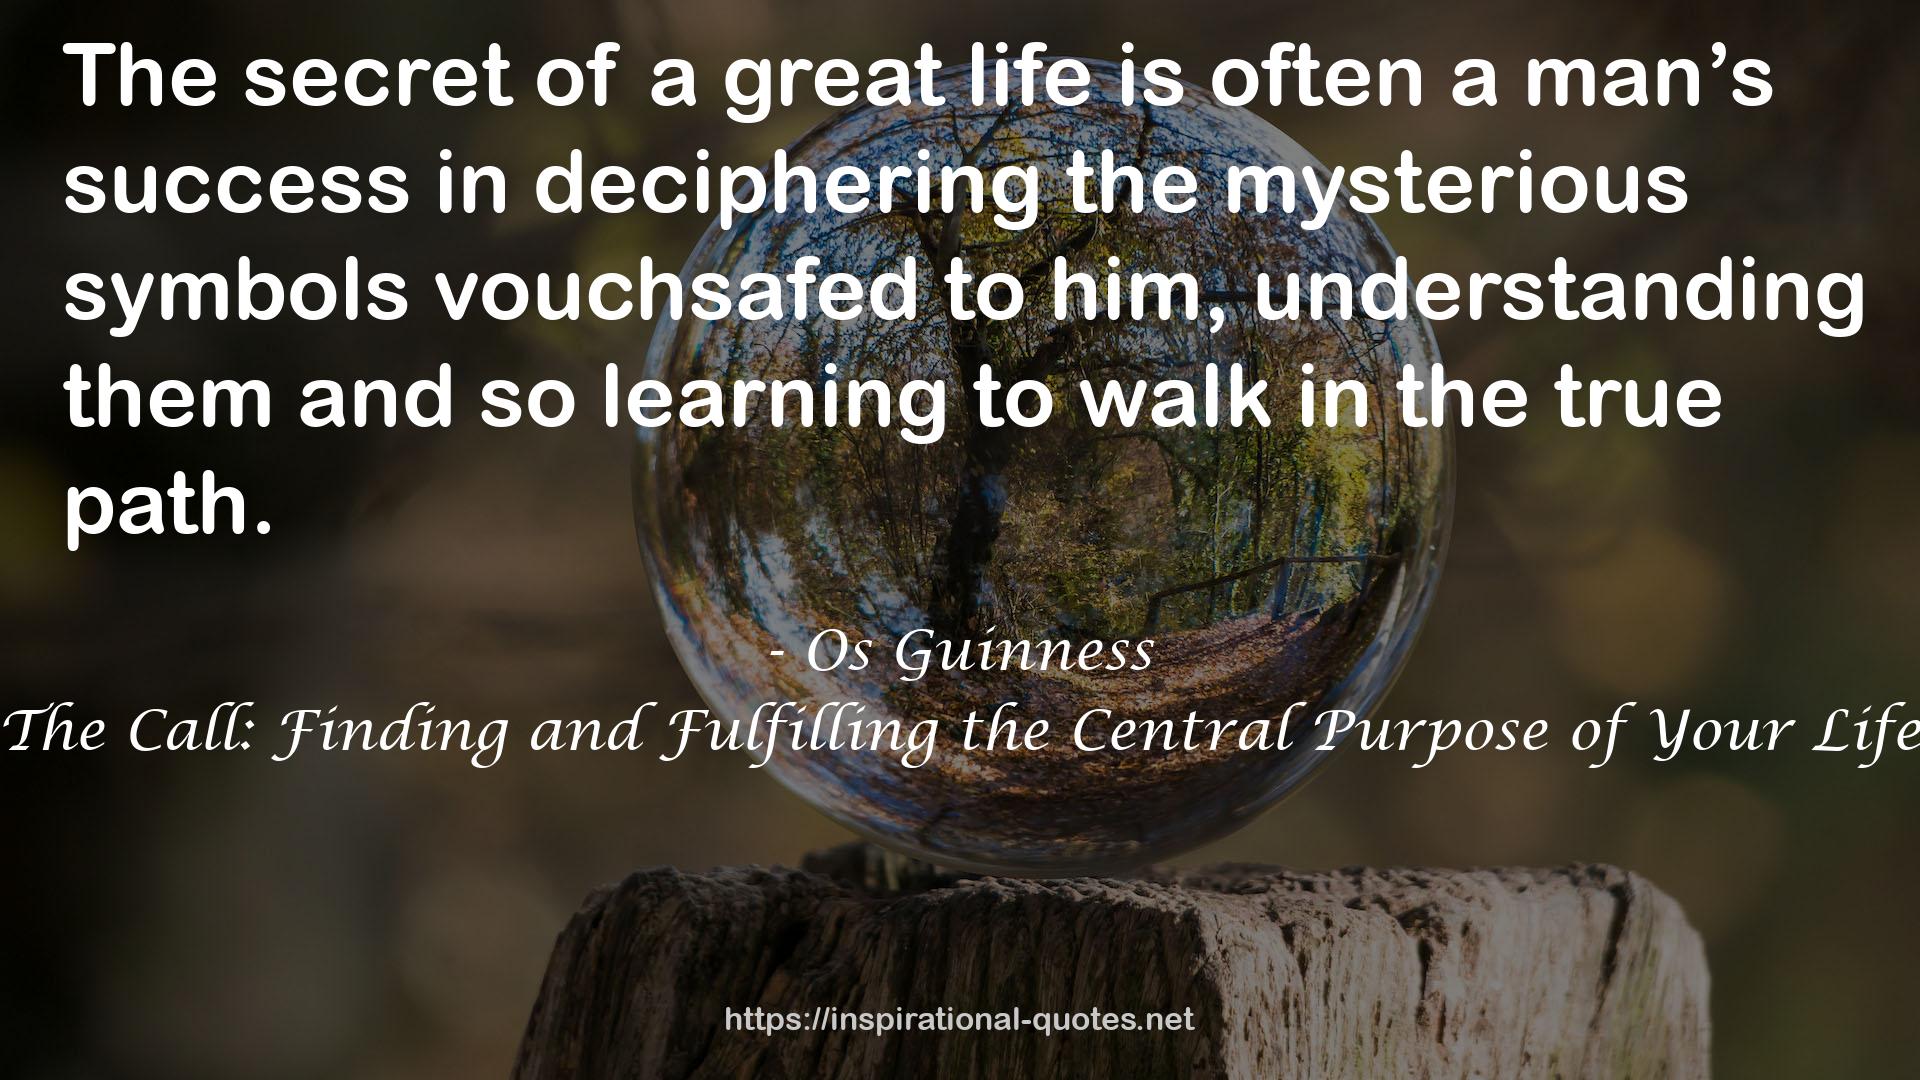 The Call: Finding and Fulfilling the Central Purpose of Your Life QUOTES